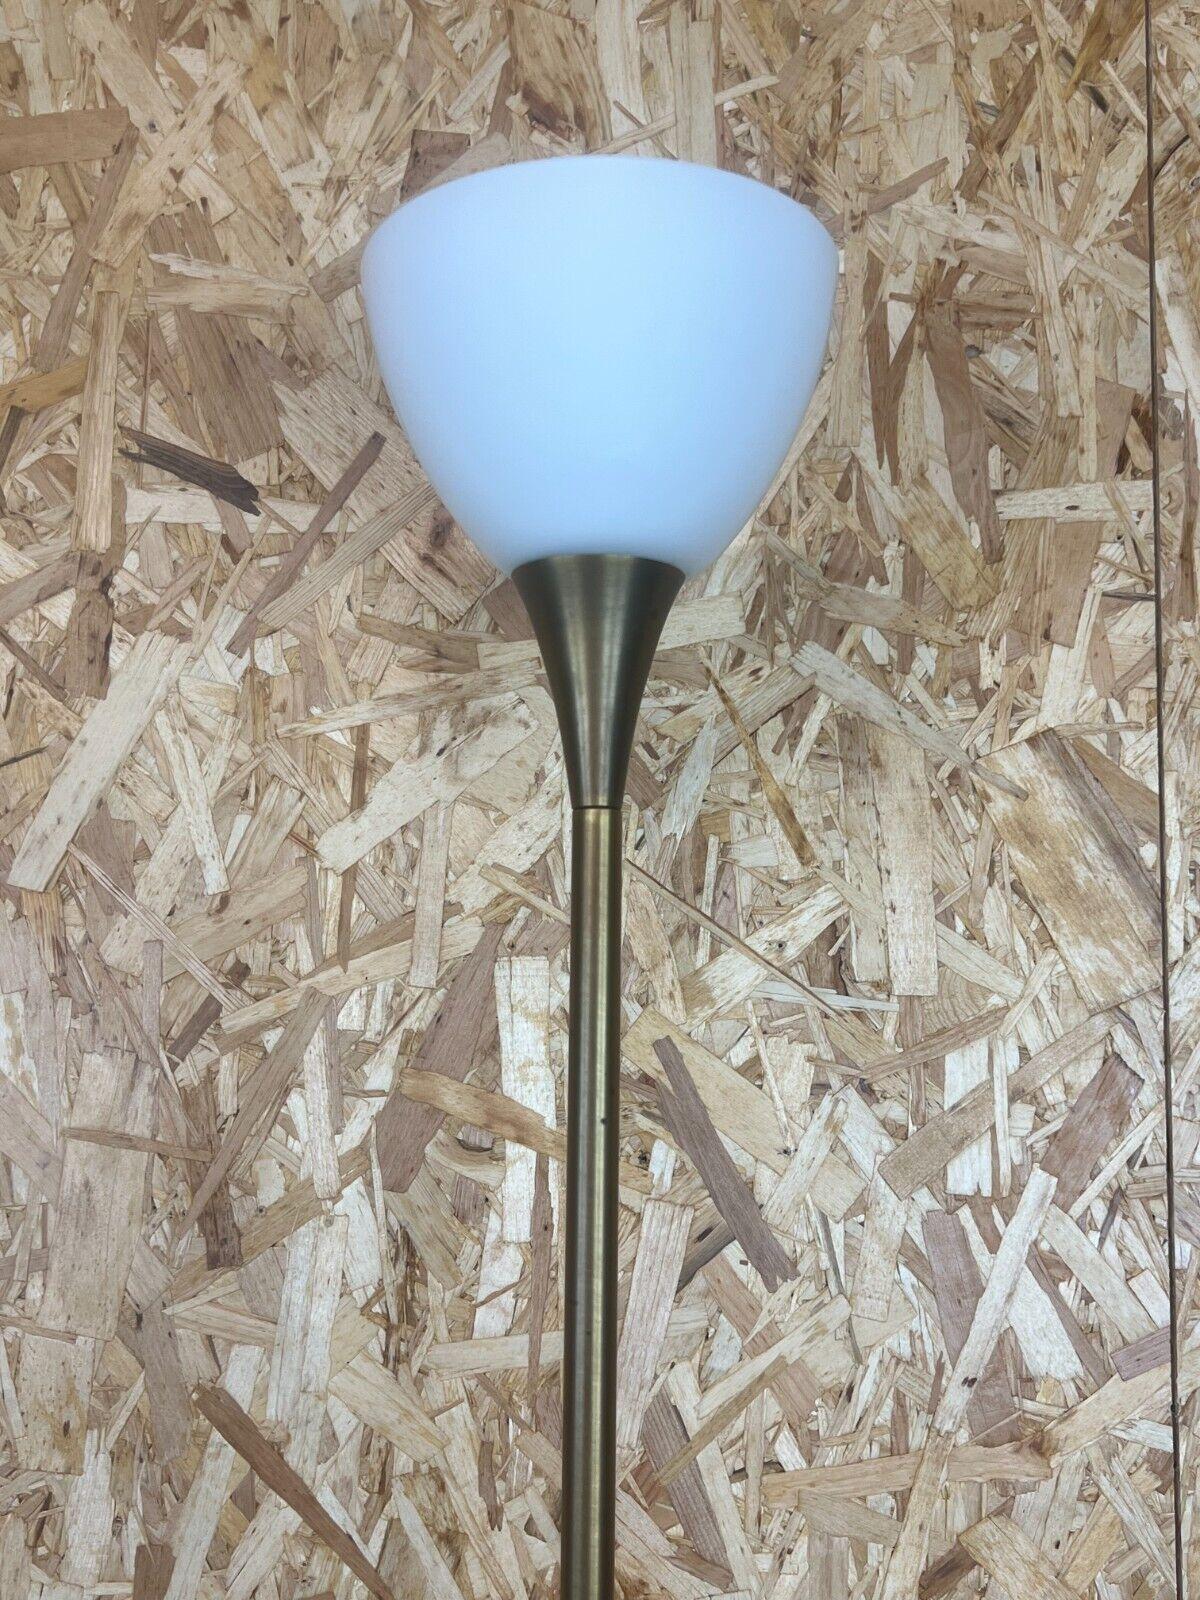 60s 70s Floor Lamp Hillebrand Space Age Design Braas & Glass For Sale 2